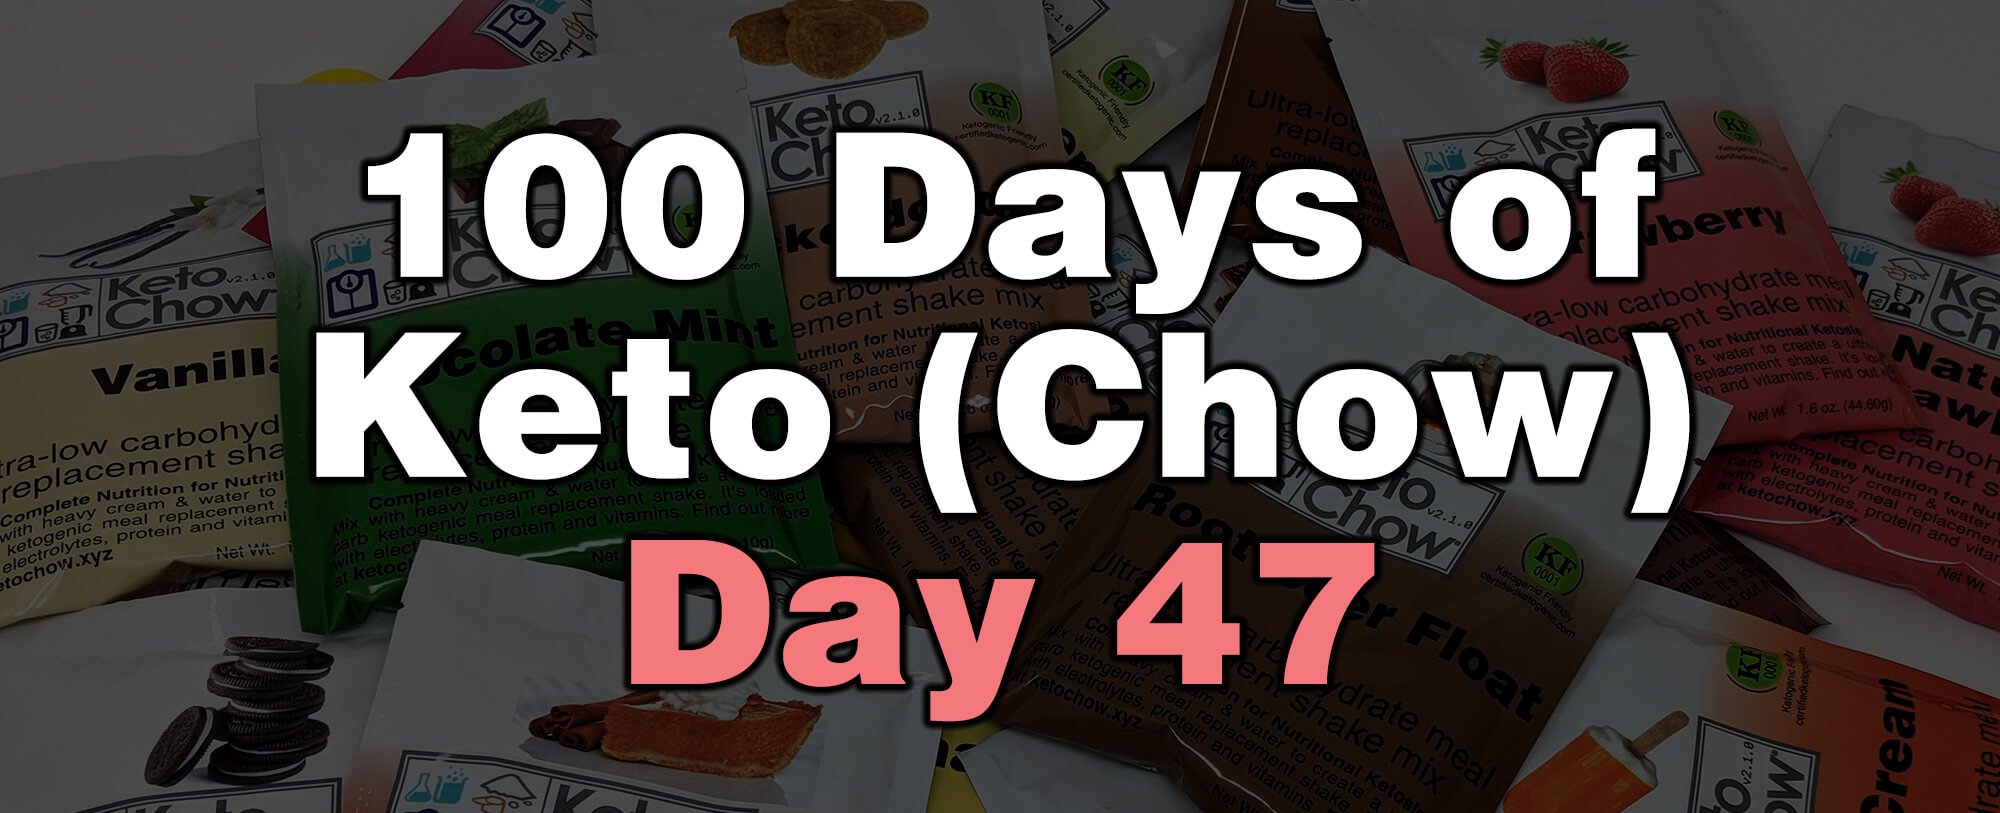 100 days of keto chow day 47